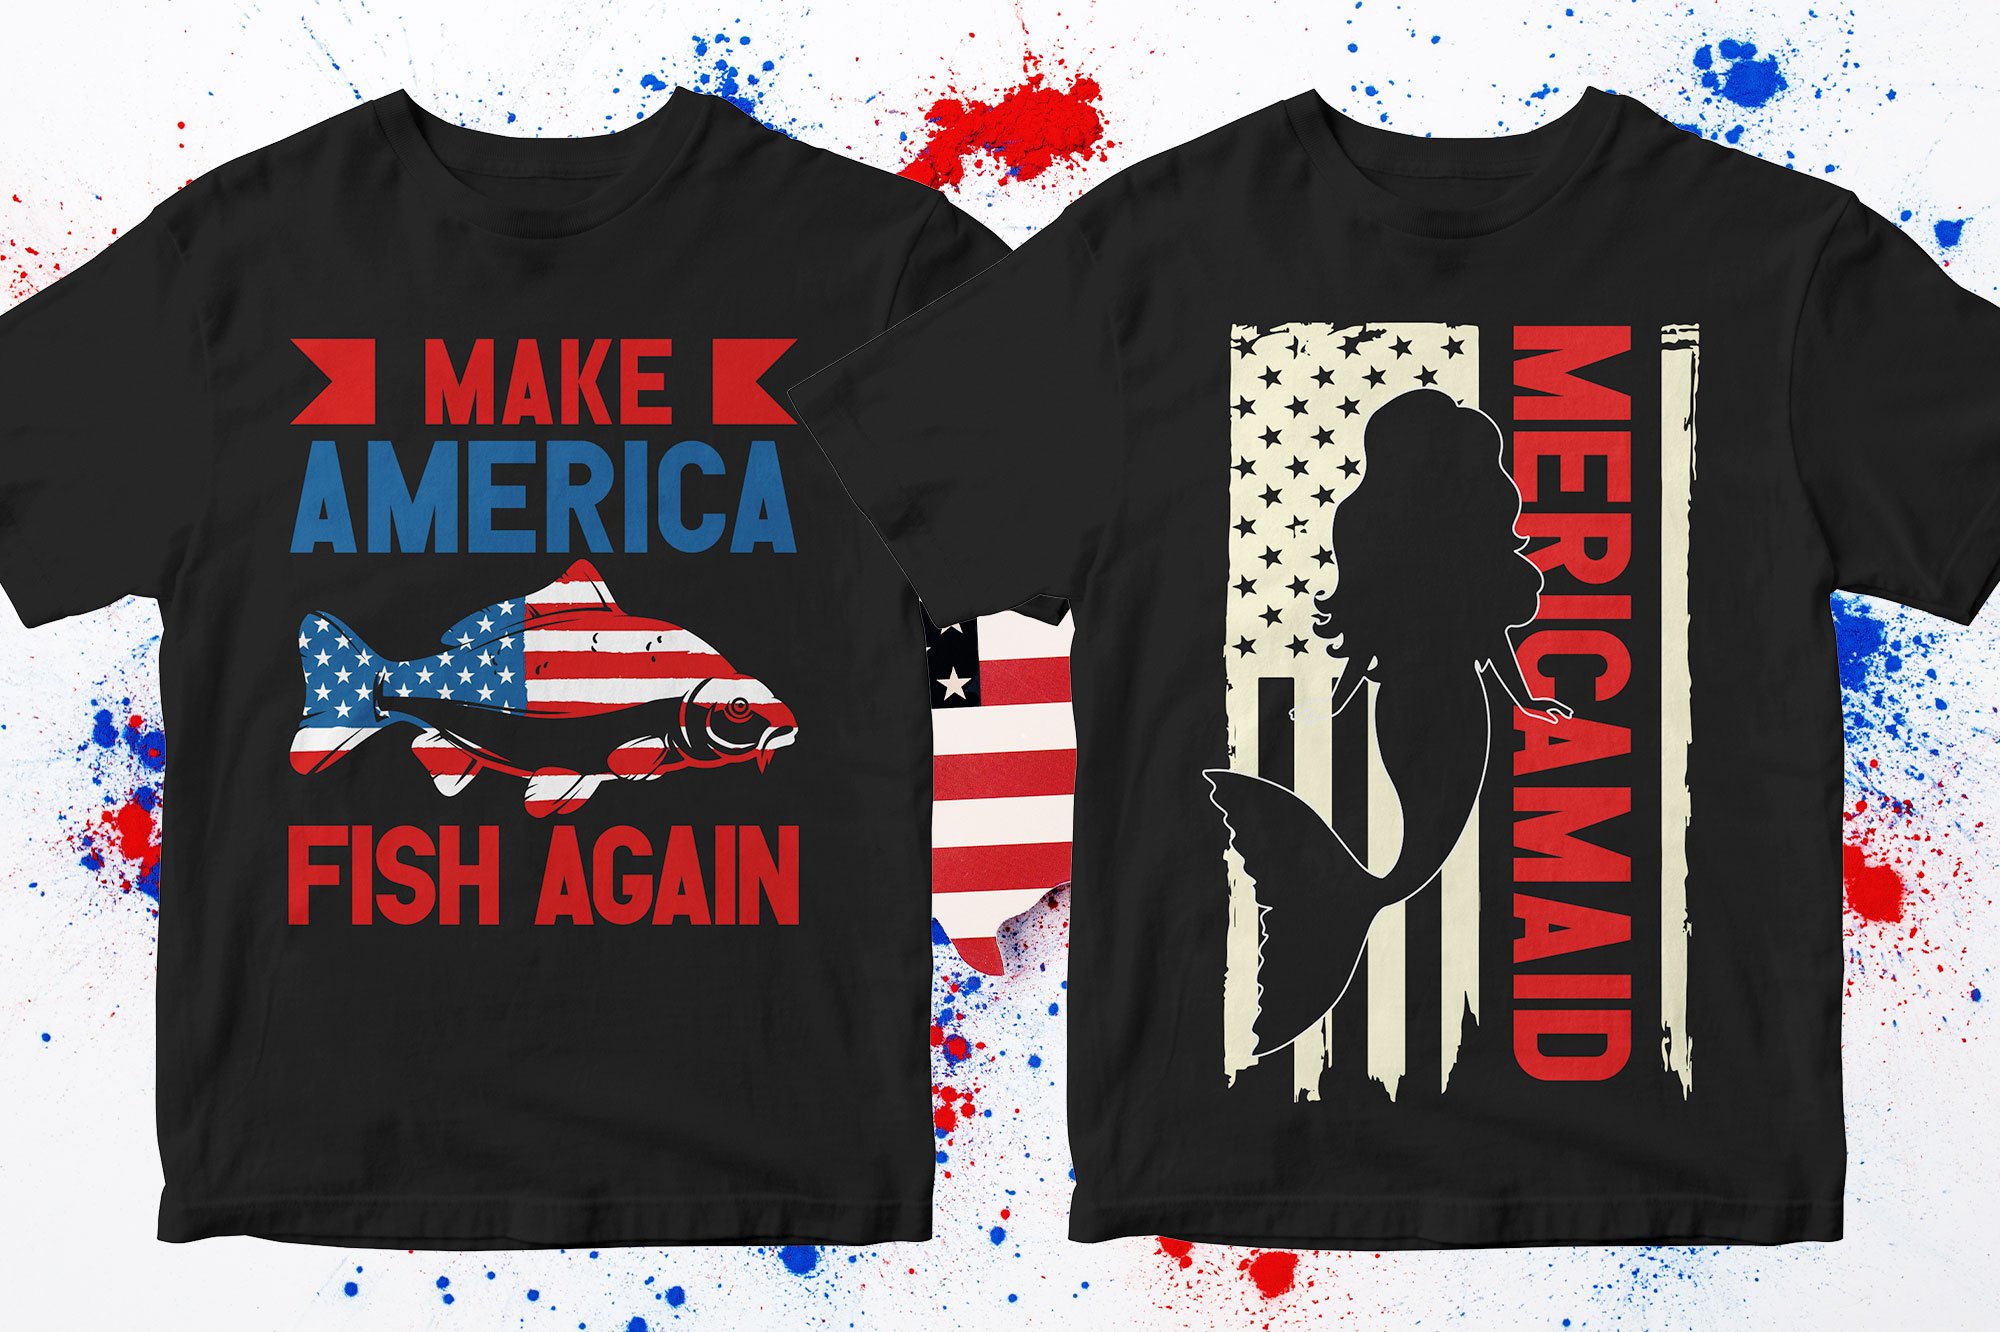 Black t-shirt with editable 4th of july t shirt designs.